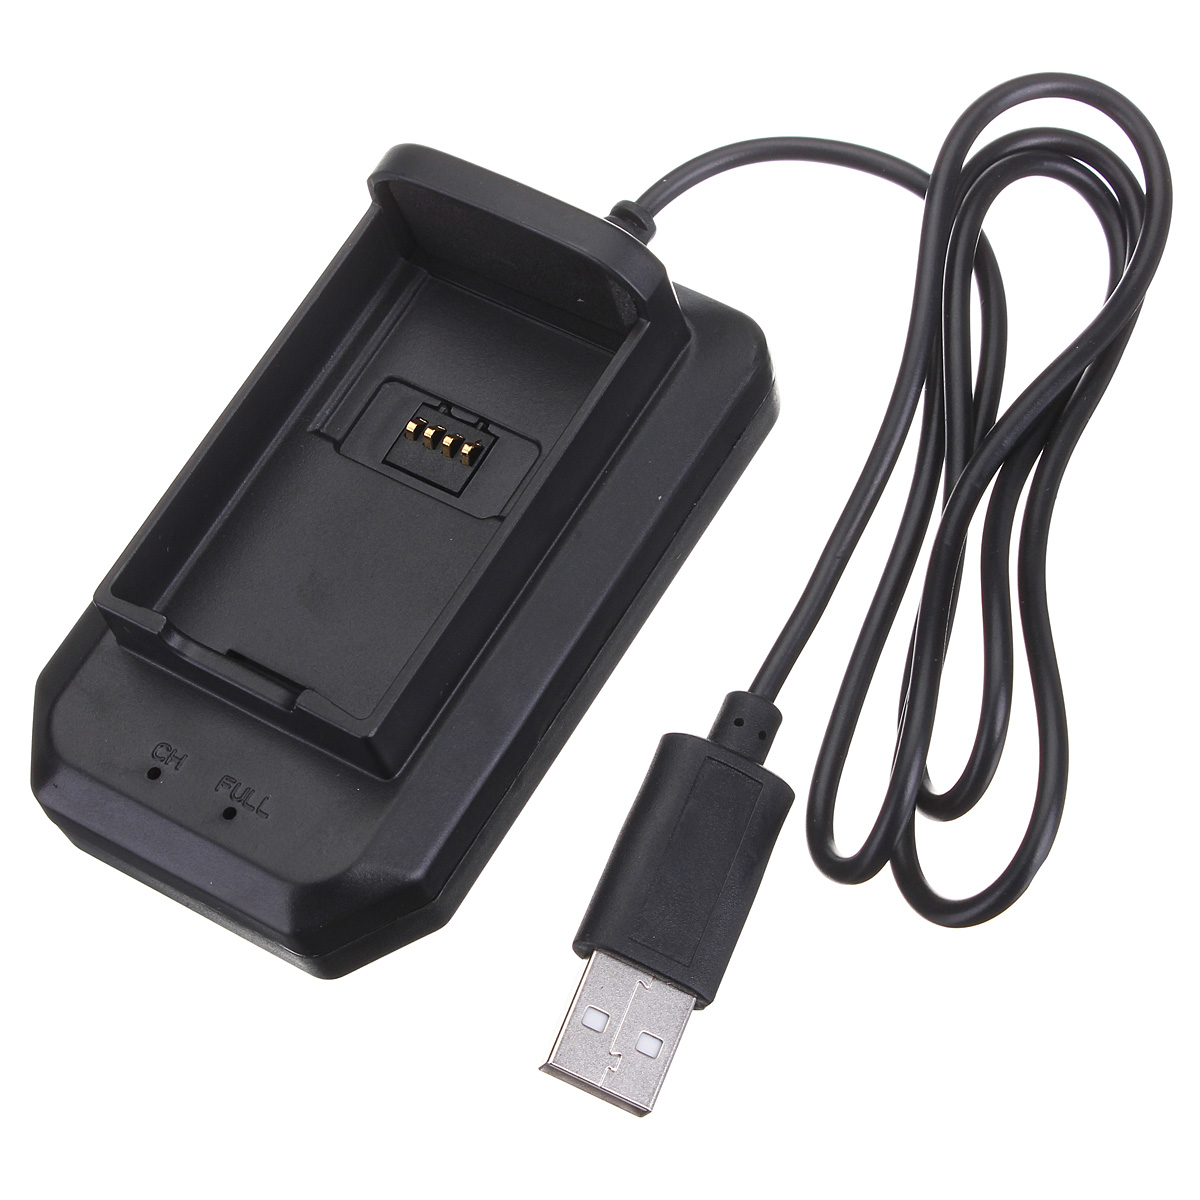 

USB Wireless Controller Battery Charging Charger Dock For Xbox 360